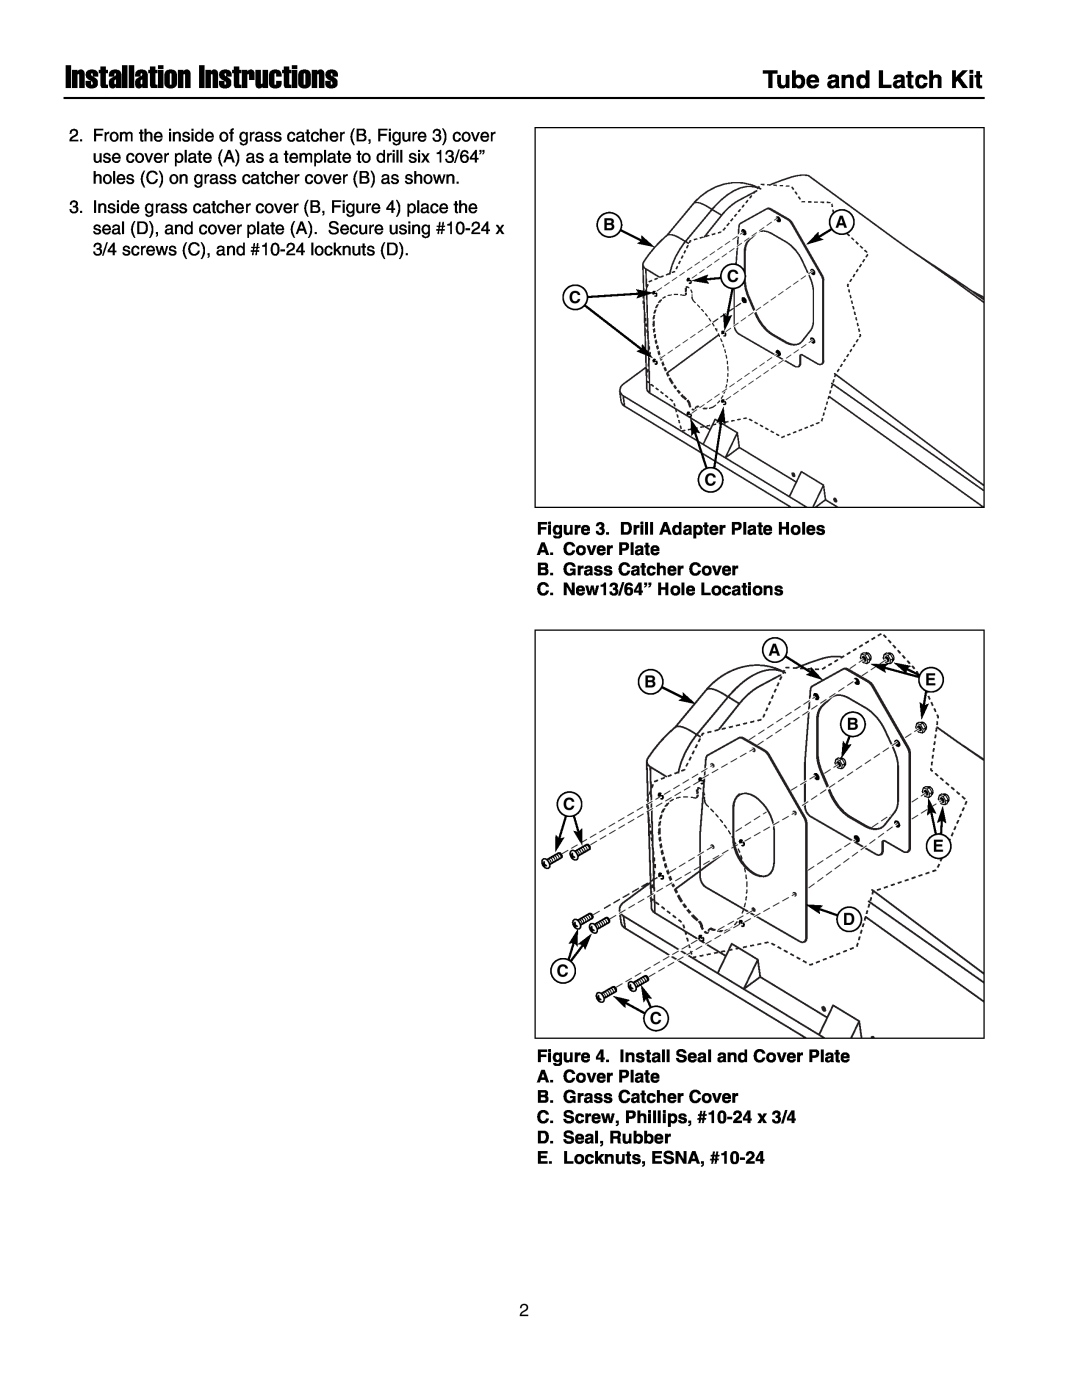 Snapper 1687262 installation instructions Installation Instructions, Tube and Latch Kit 